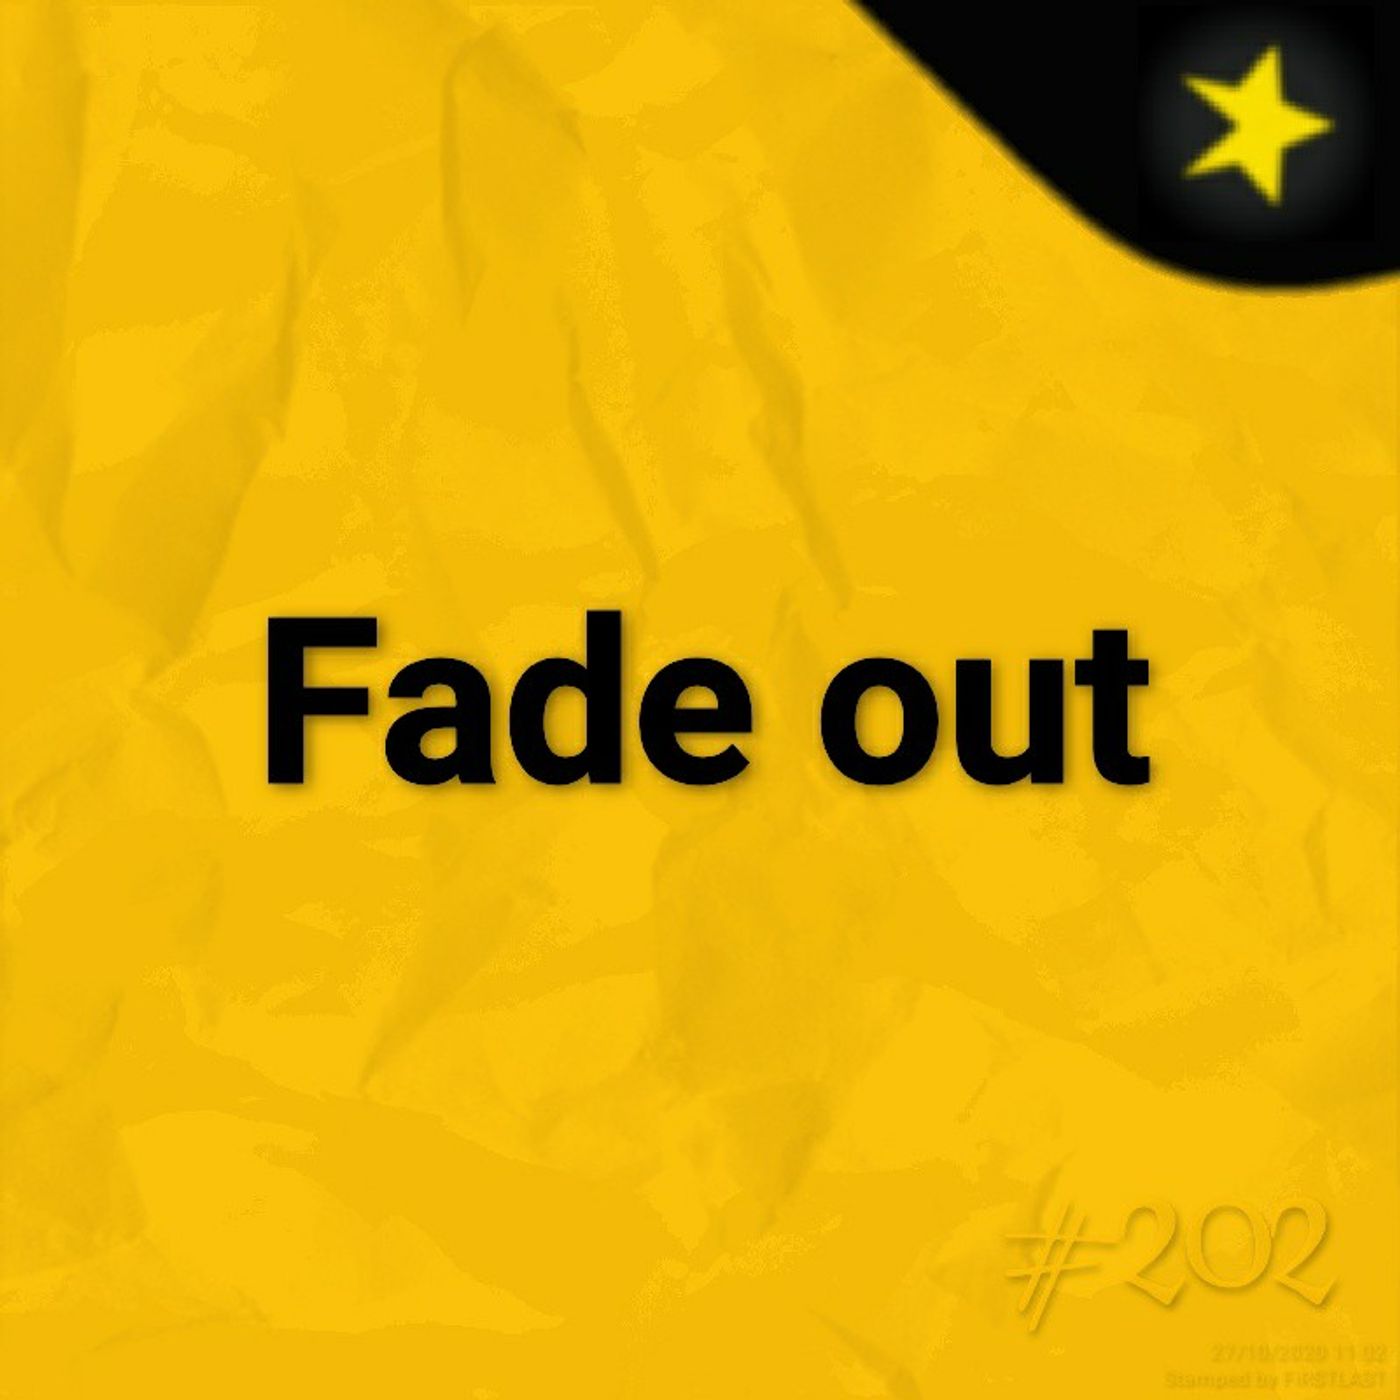 Fade out (#202)